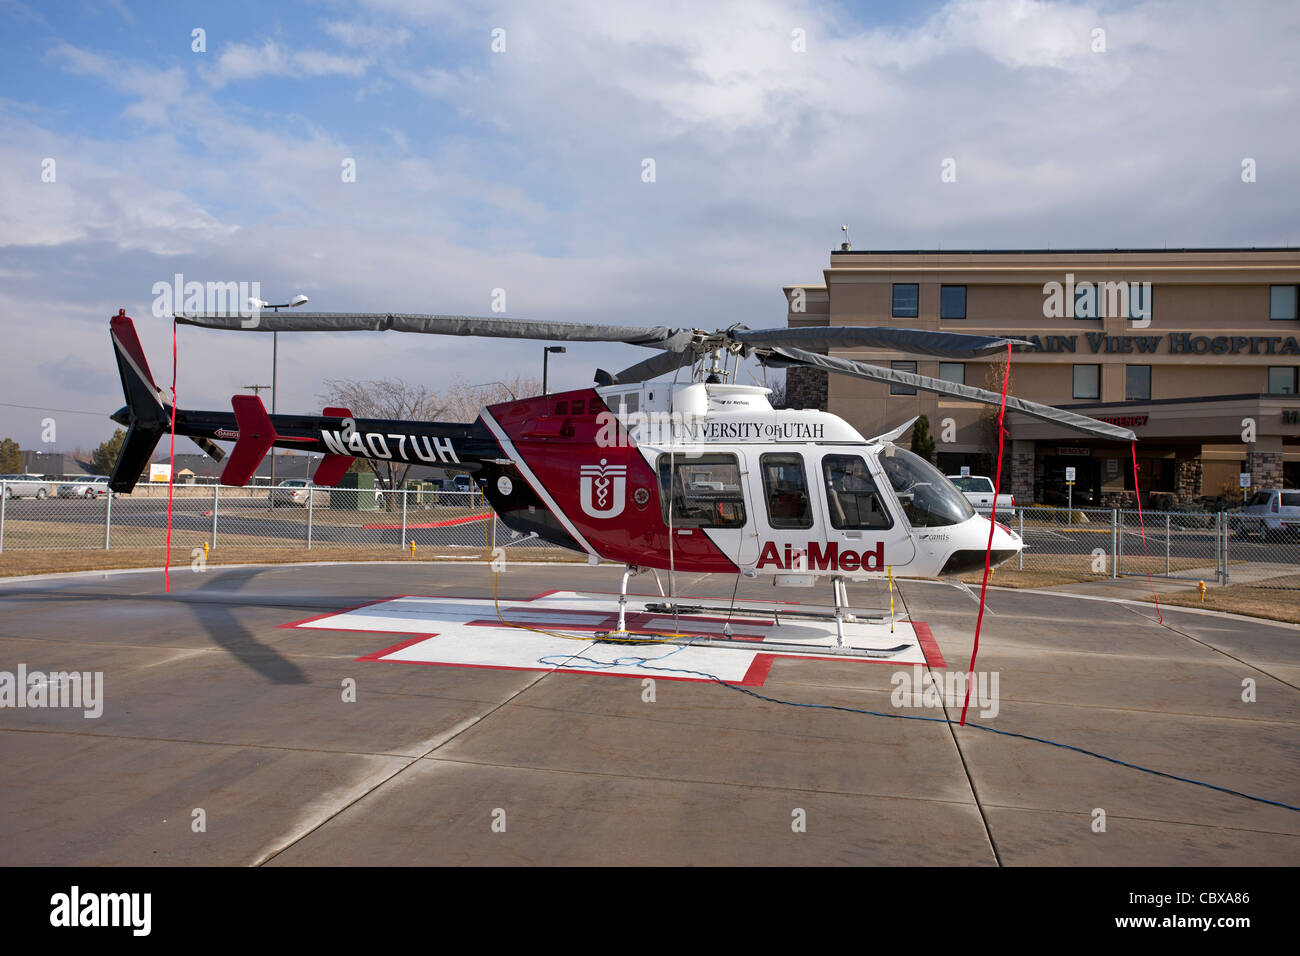 Helicopter AirMed side from University of Utah Medical Center pilot getting ready for emergency flight in front of hospital. Stock Photo